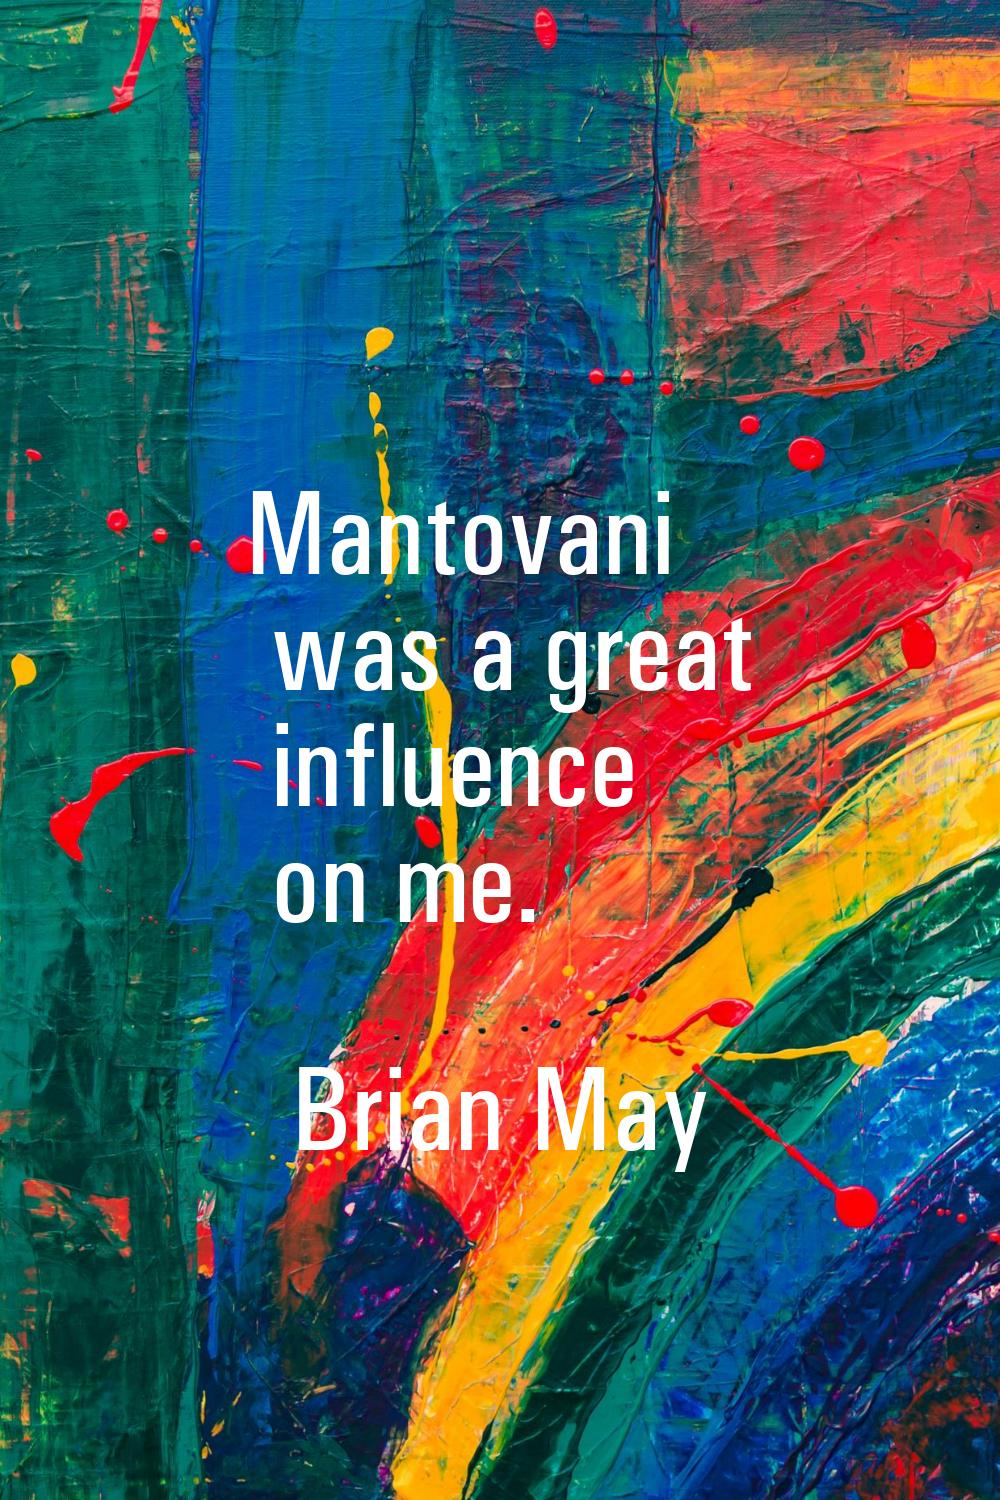 Mantovani was a great influence on me.